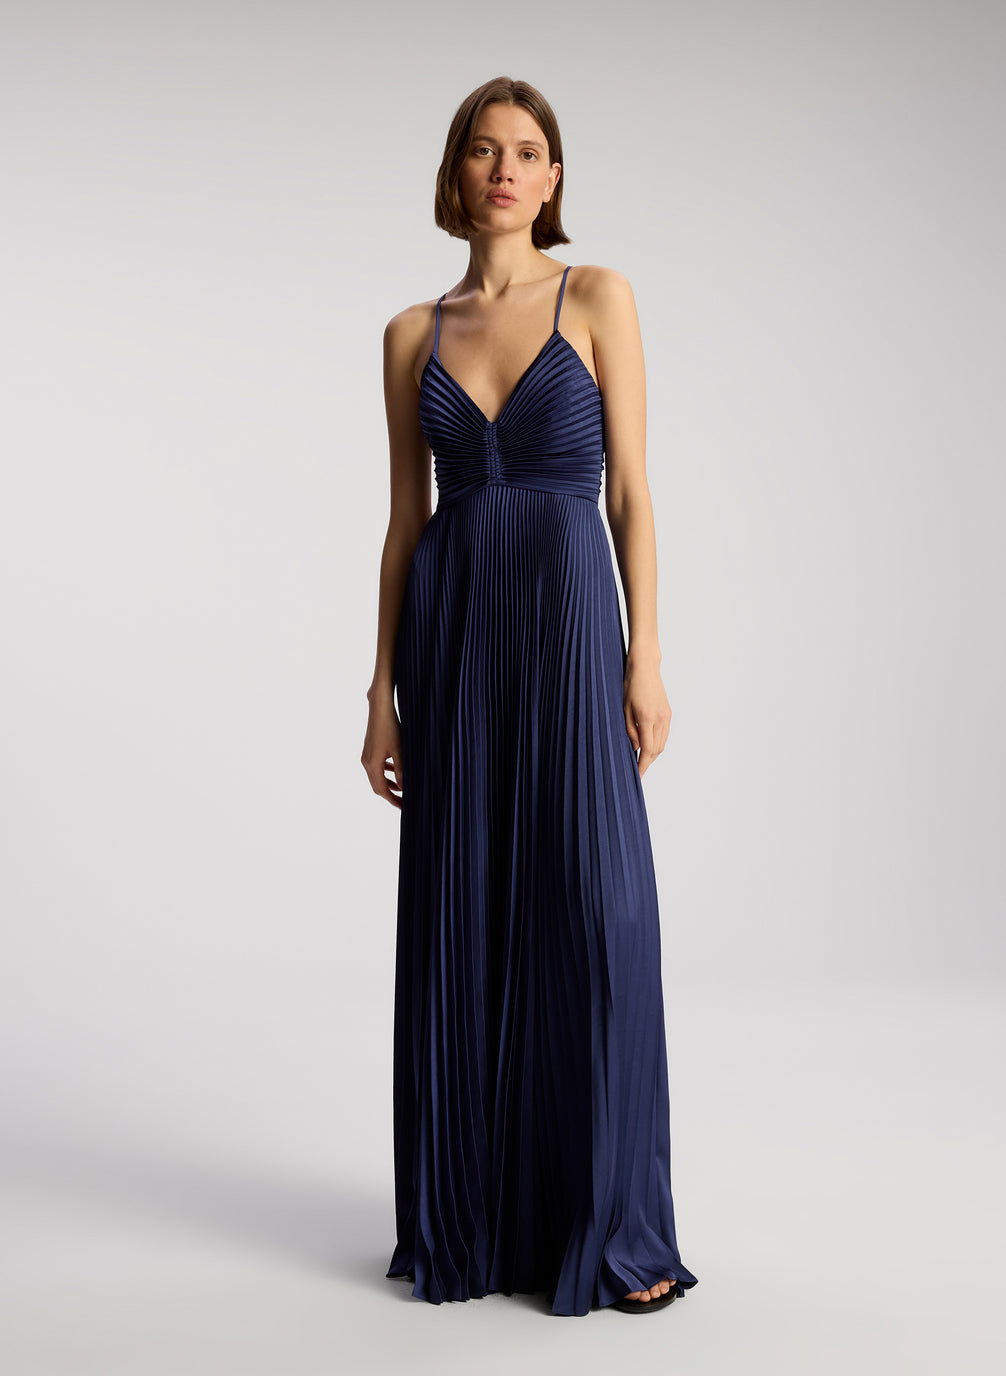 front view of woman wearing navy blue pleated maxi dress